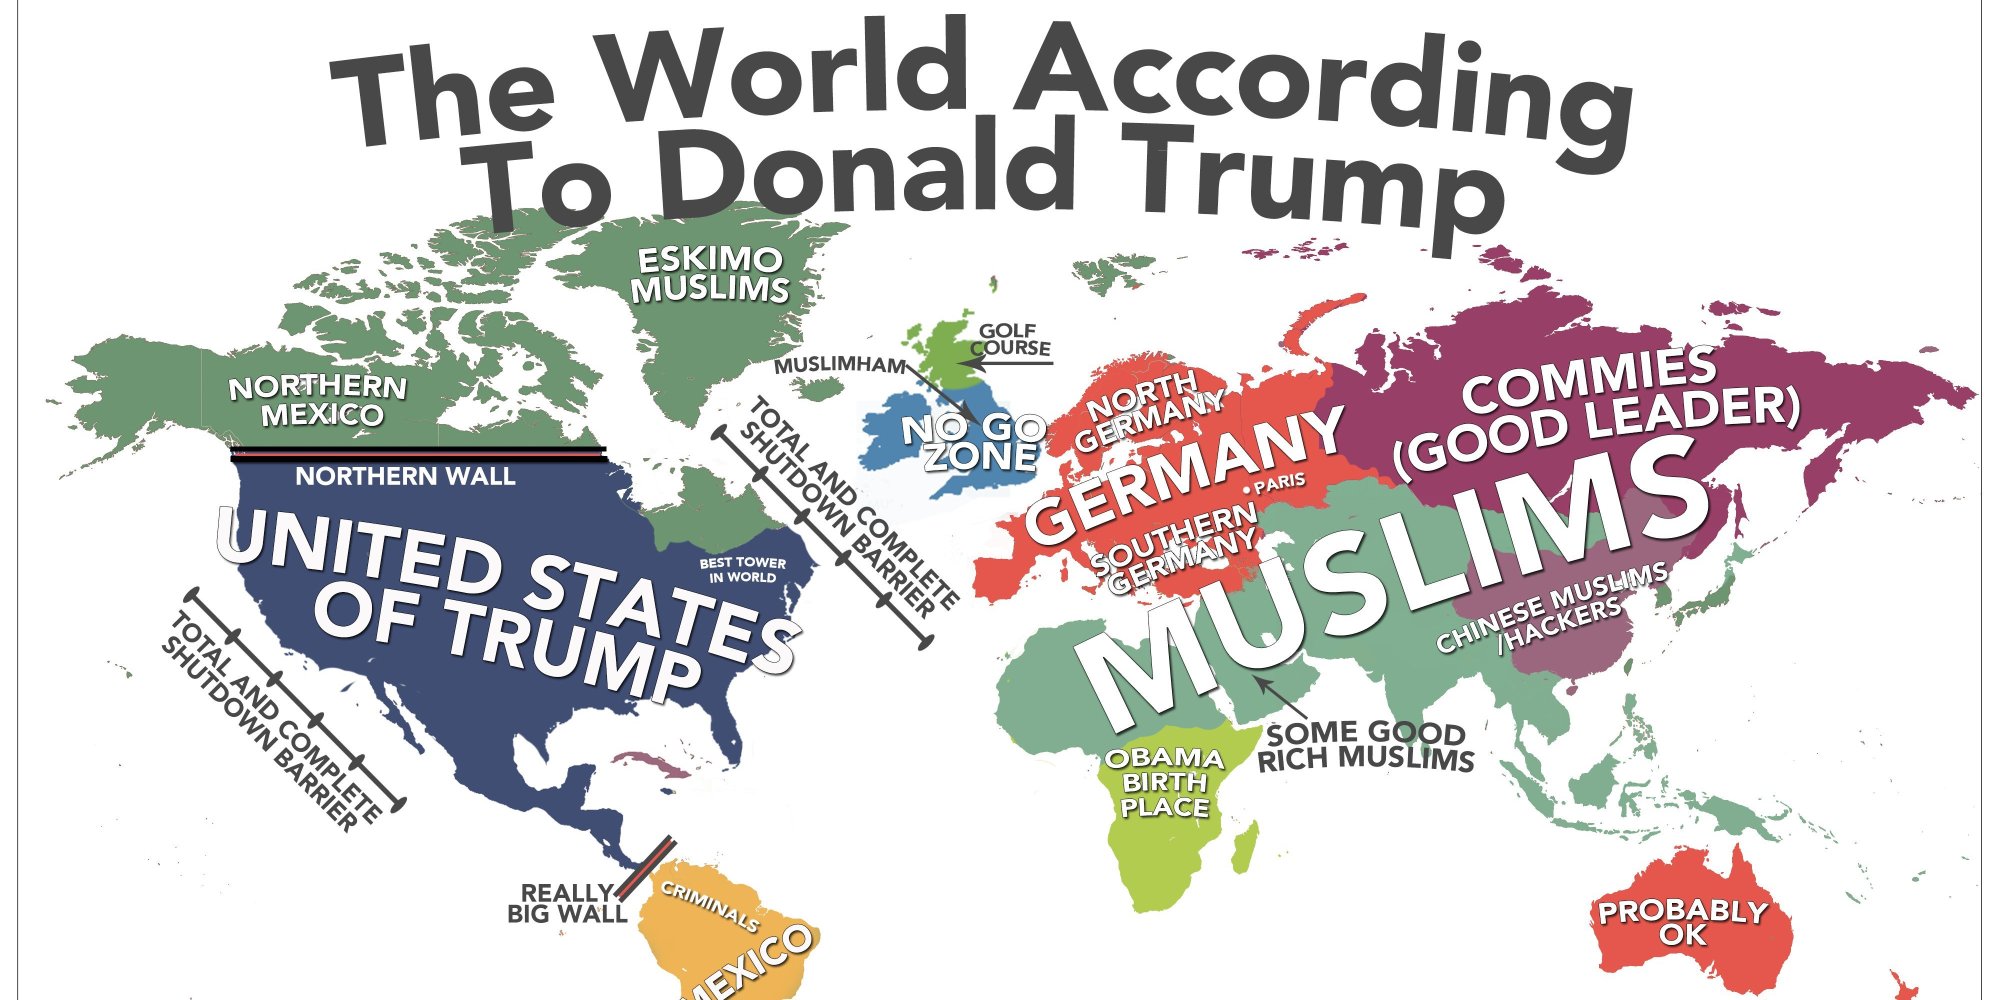 http://i.huffpost.com/gen/3871120/images/o-MAP-OF-THE-WORLD-ACCORDING-TO-DONALD-TRUMP-facebook.jpg